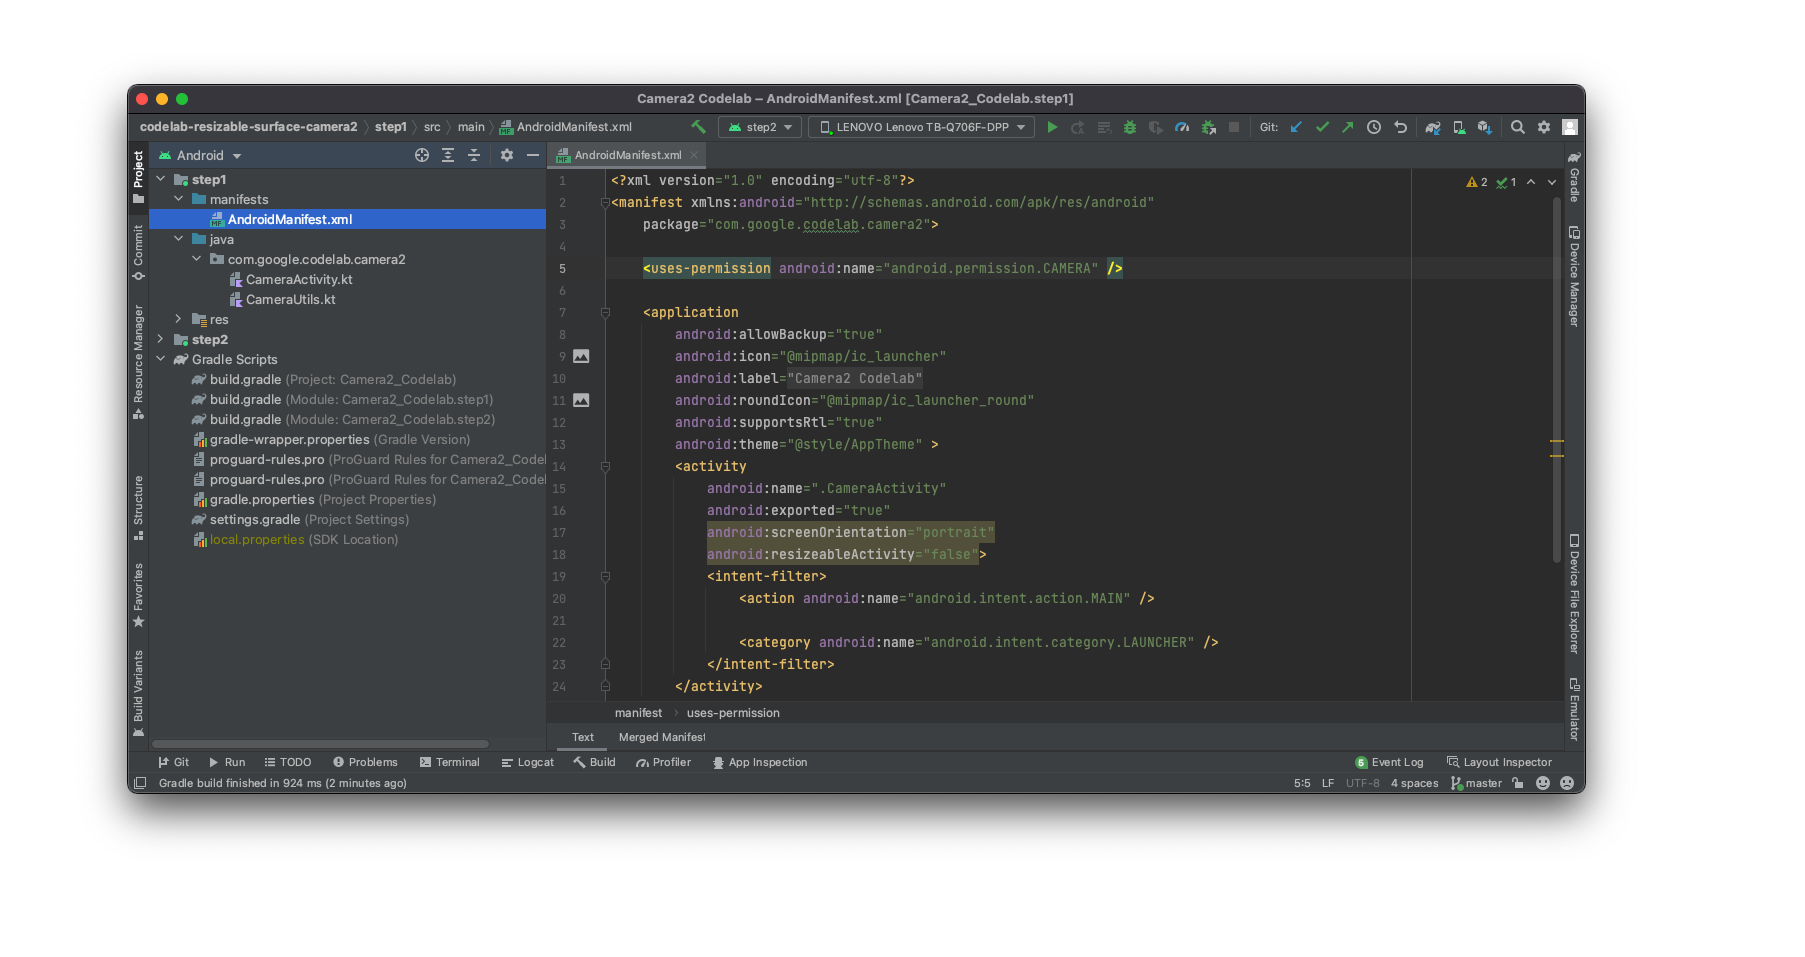 Screenshot of Android Studio showing the code related to this codelab